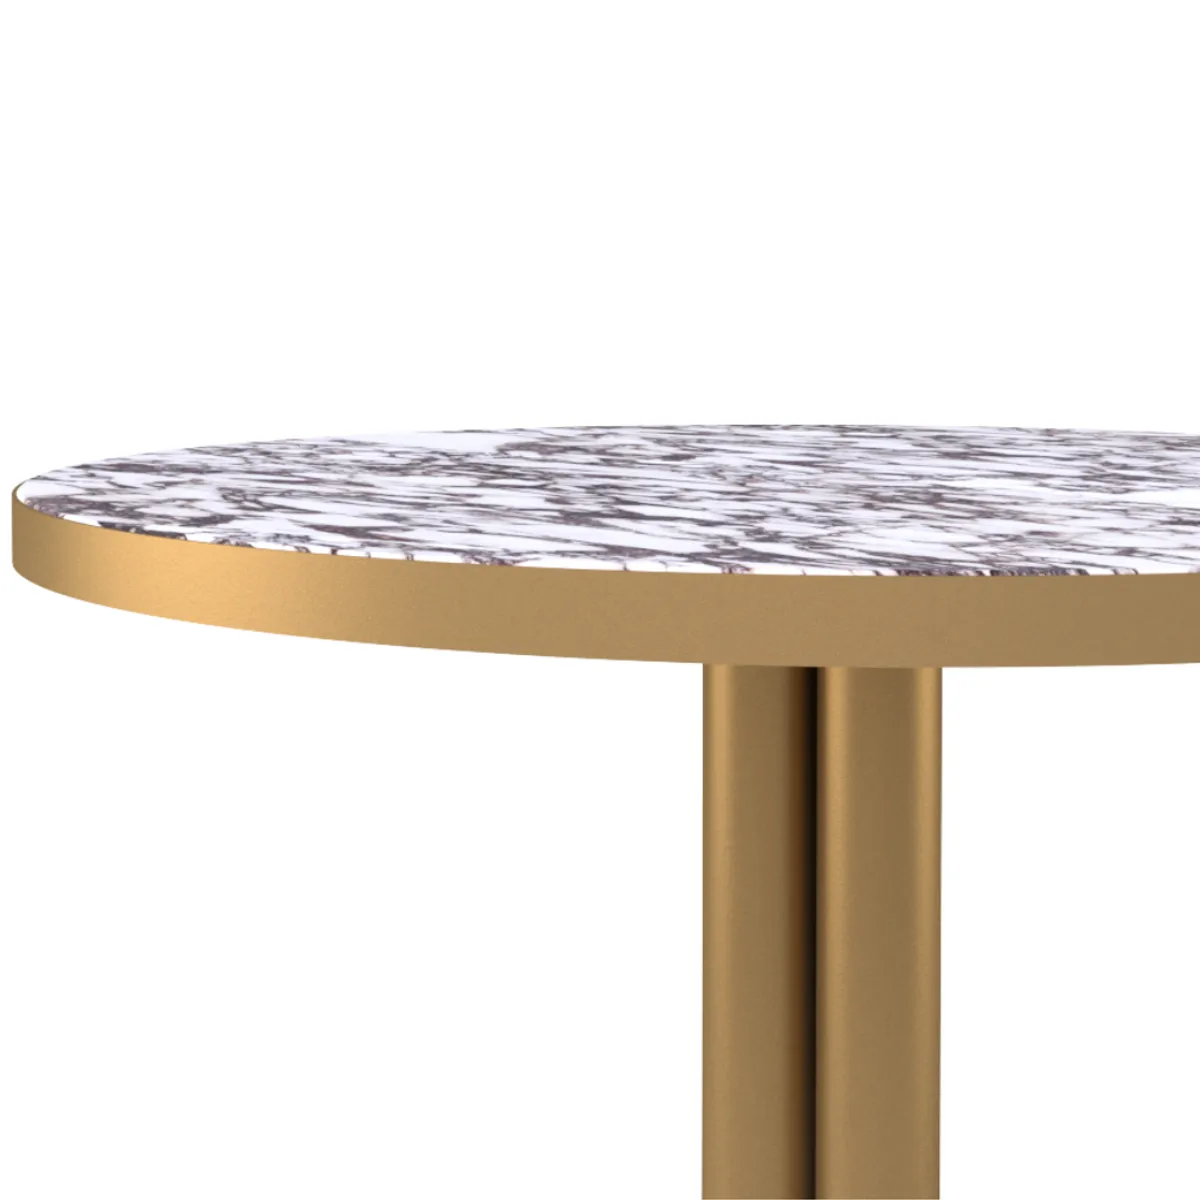 Gouqi oval dining table 4